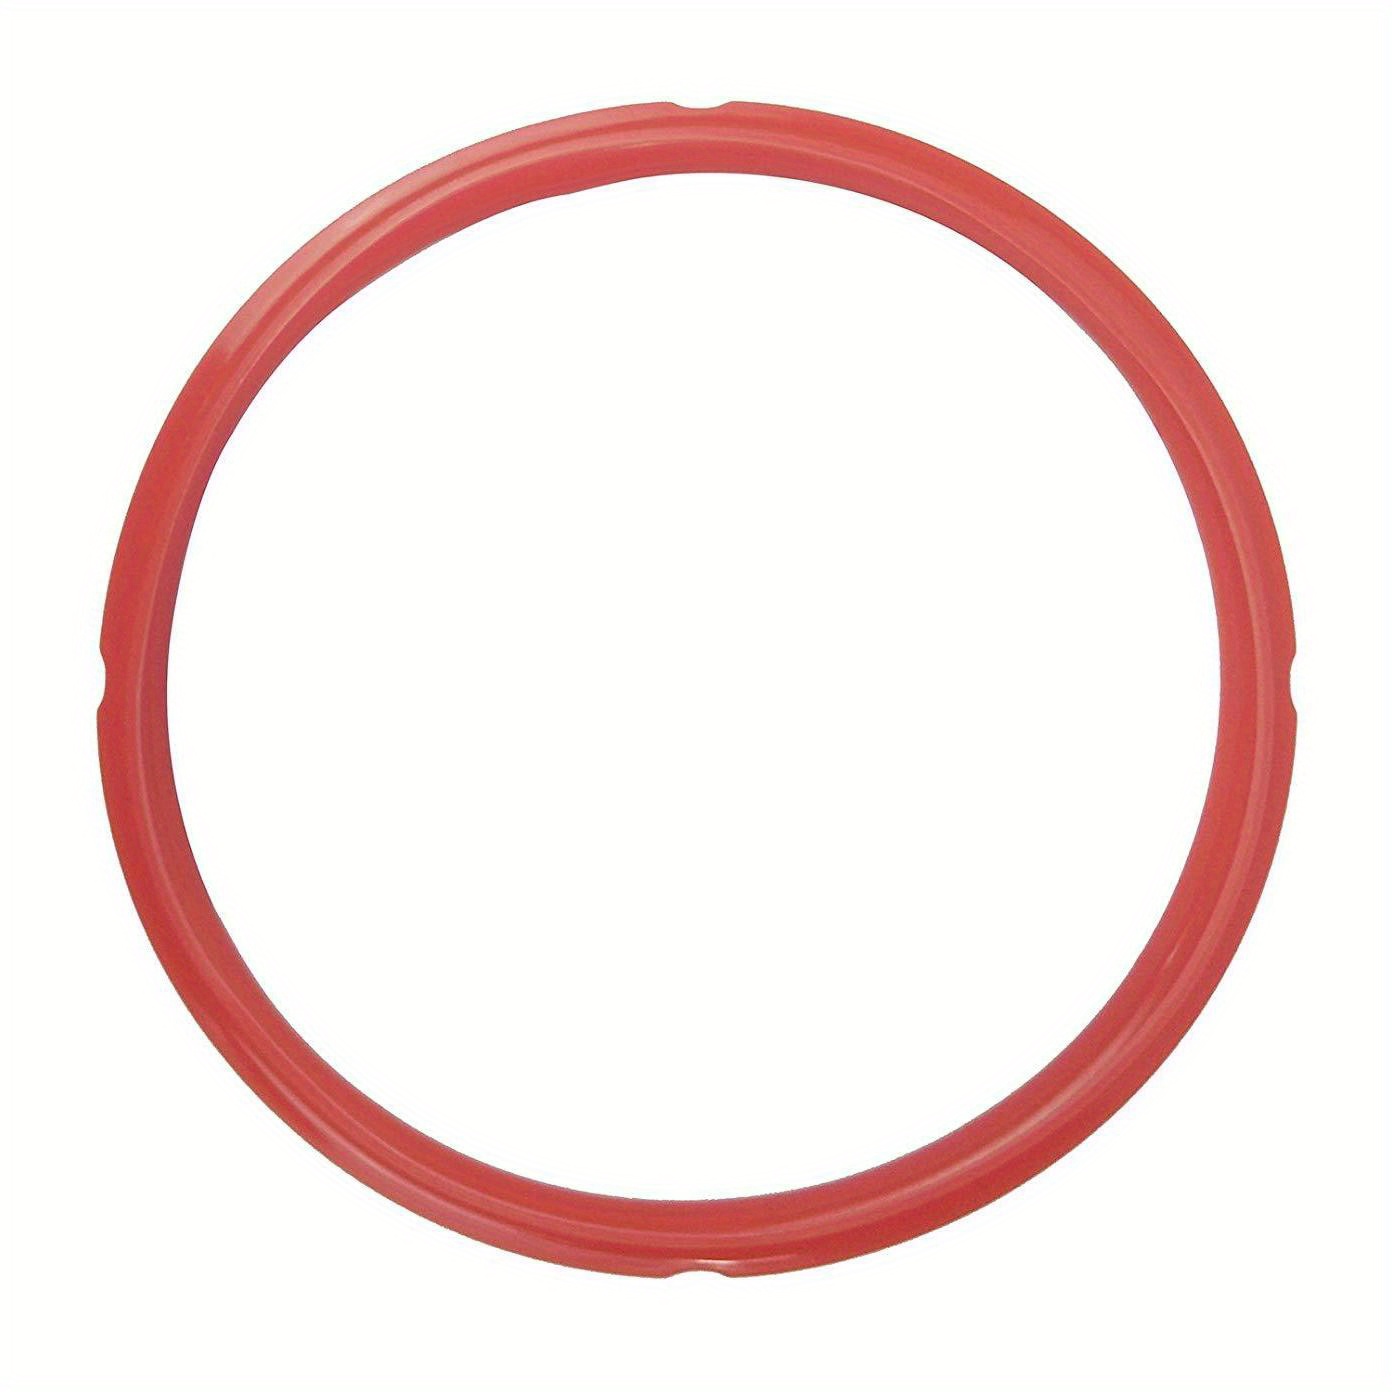 COSCOD Sealing Ring for 6 qt Instant Pot Replacement Silicone Gasket Seal Rings for InstaPot 6 Quart 2pcs Sealer Accessories Parts for Insta